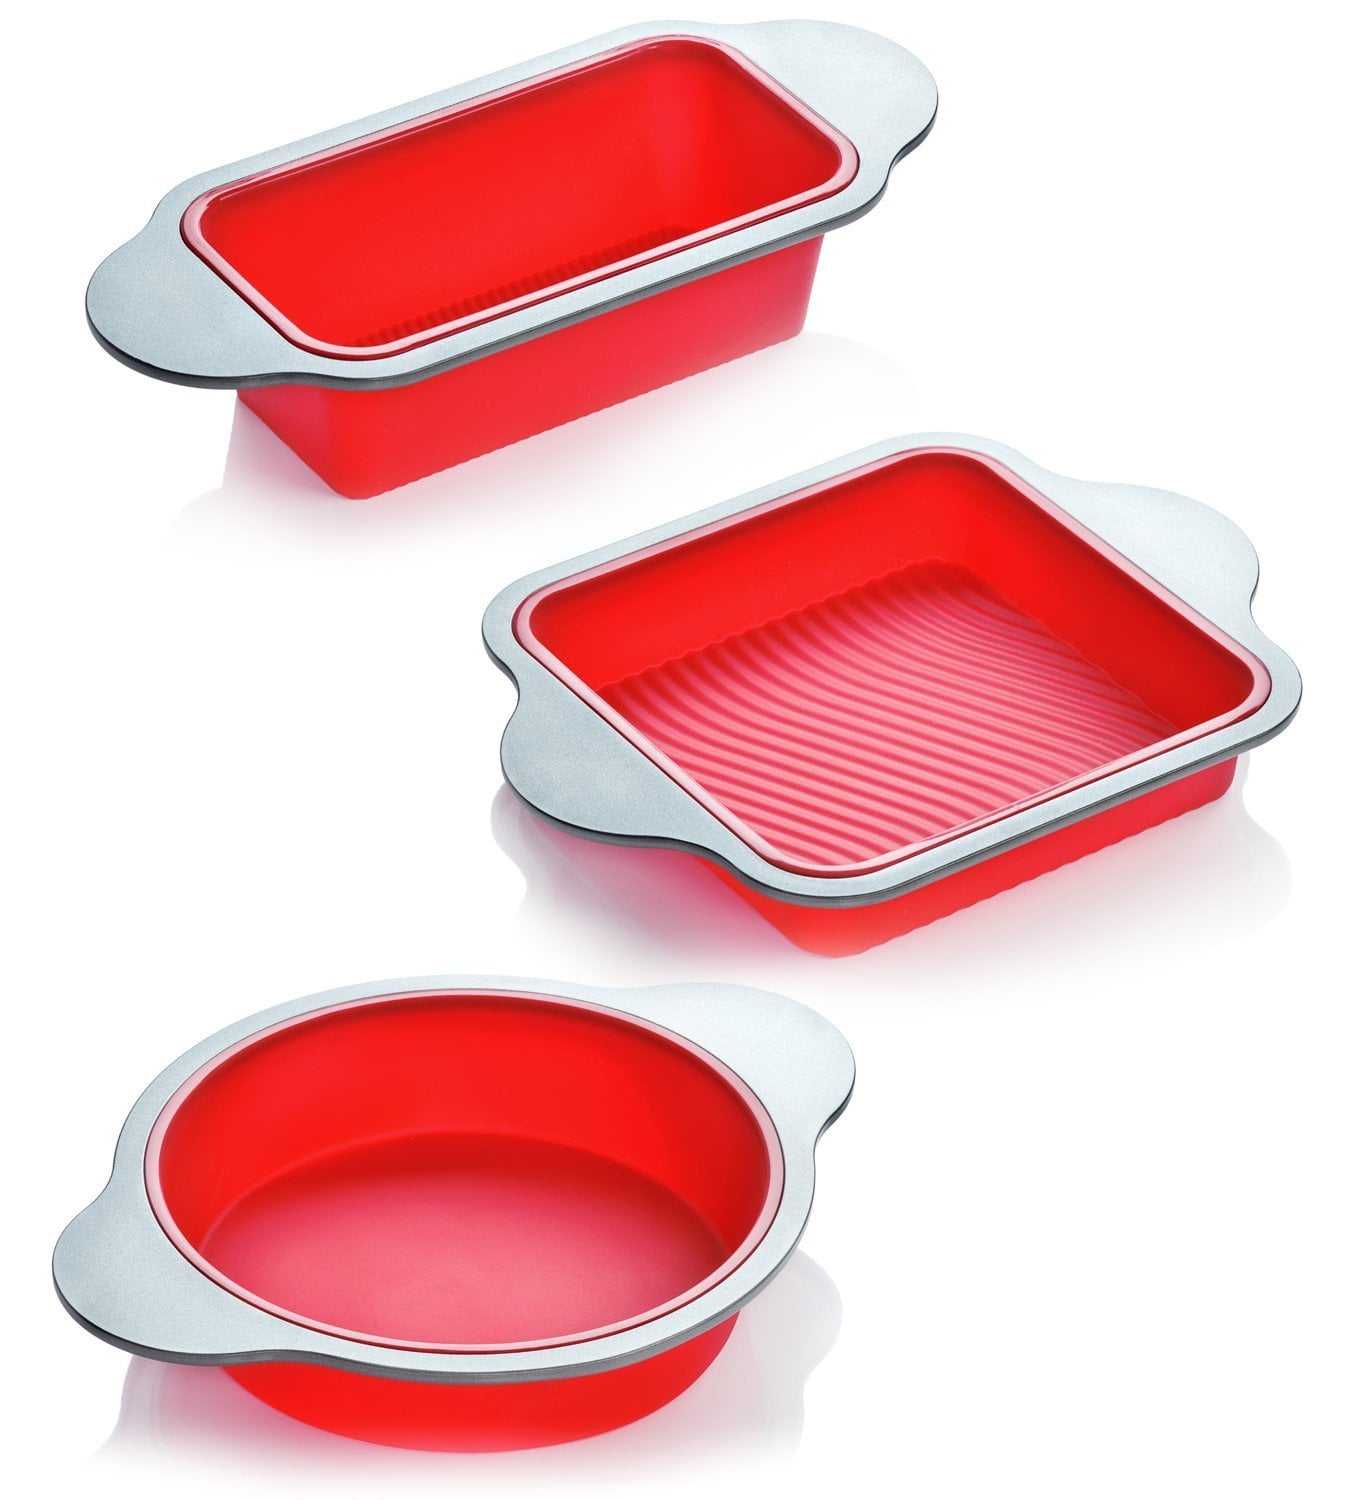 fanshiontide 4 Pcs Silicone Cake Moulds Tins Red and Blue Round Cake Pan Set 4 6 Non-Stick Baking Molds Cake Mould Pastry Baking Tray